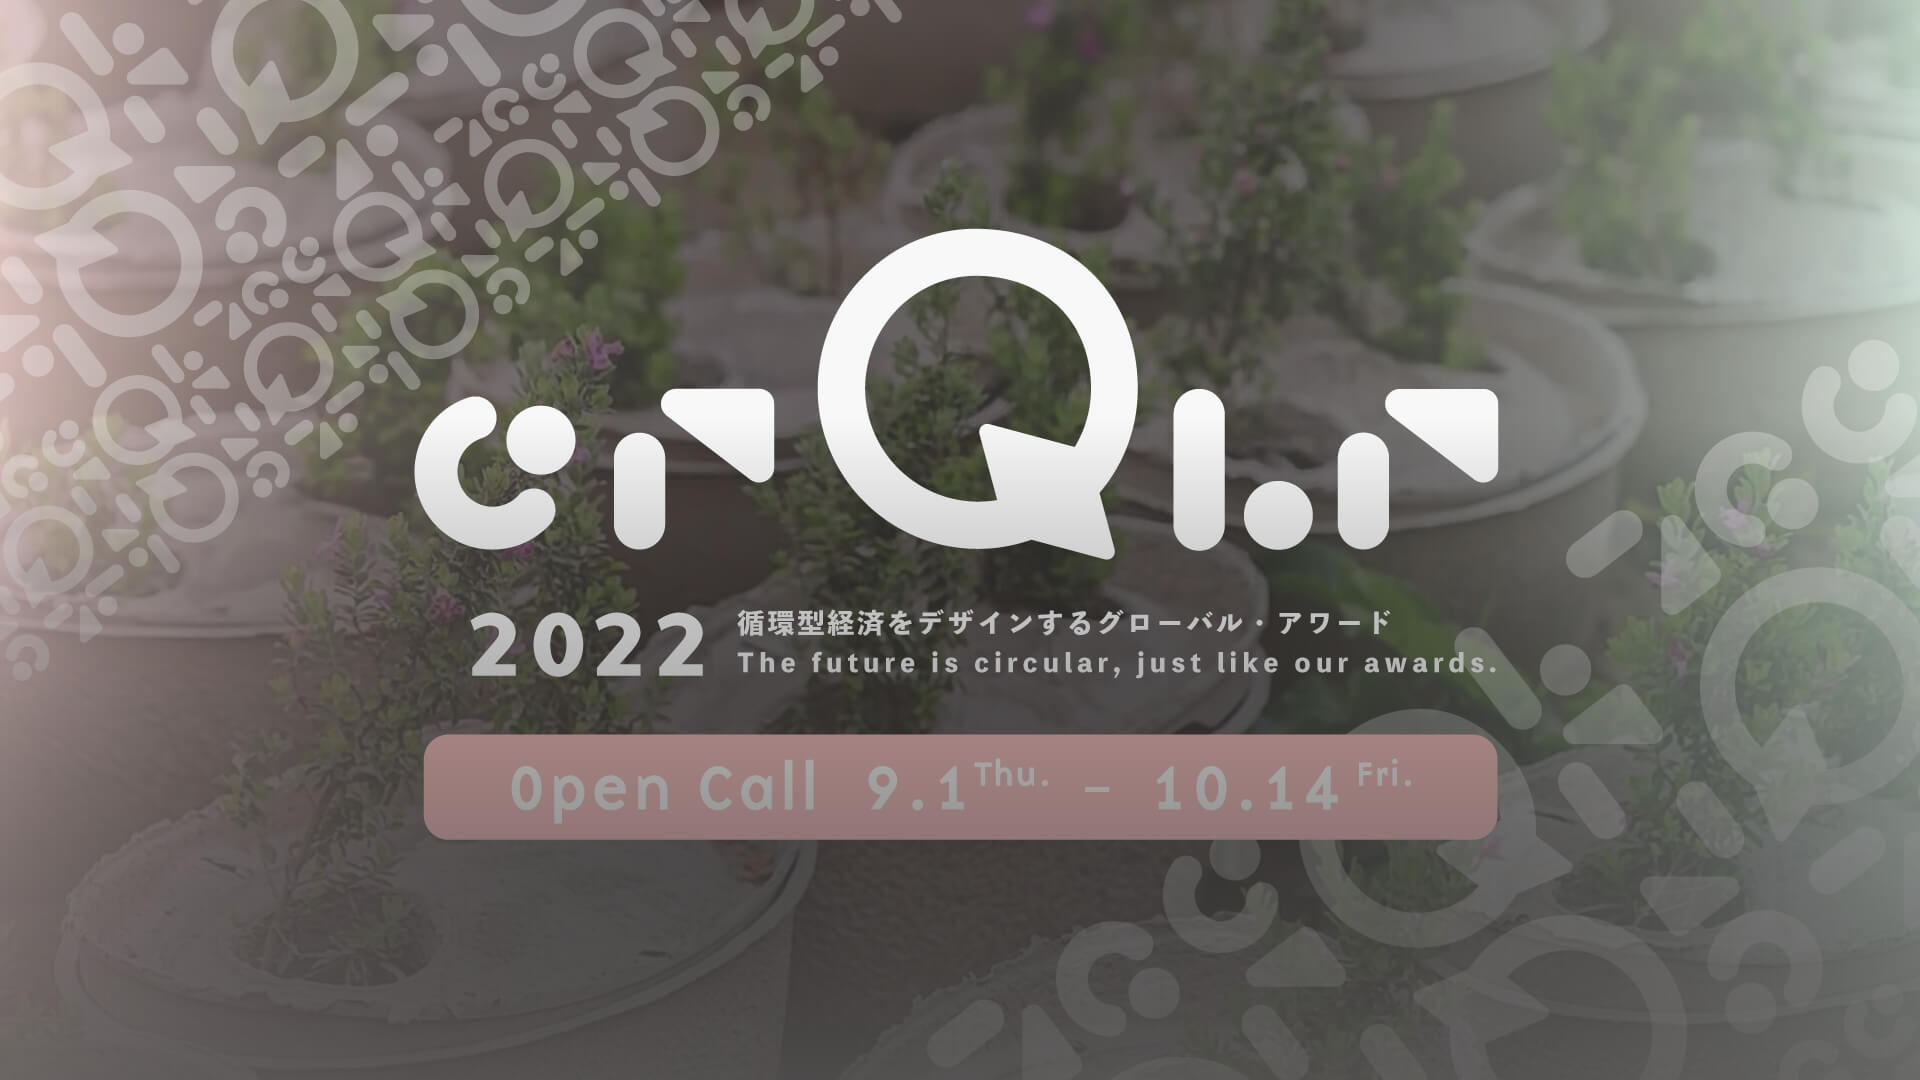 2nd Annual crQlr Awards 2022, the Global Awards for Designing a Circular Economy